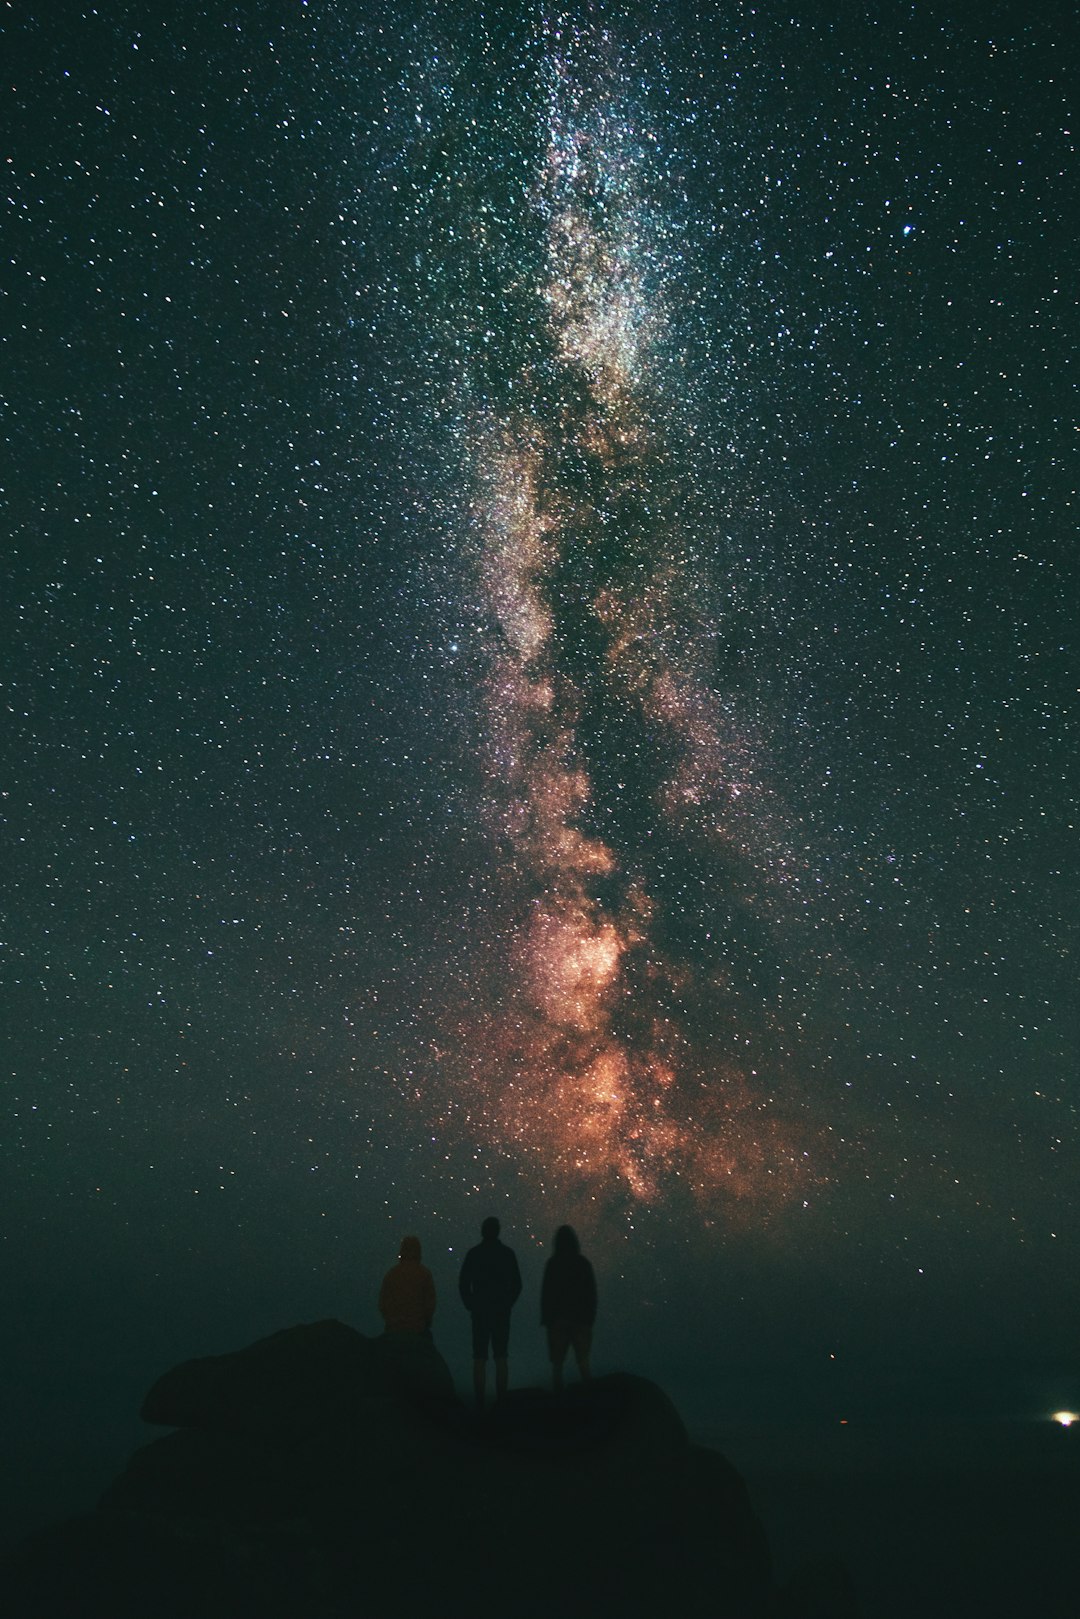 We are so small compared to the inconceivably vast universe. When looking into the milky way you wonder what else is out there. The universe we live in is incredible ❤️